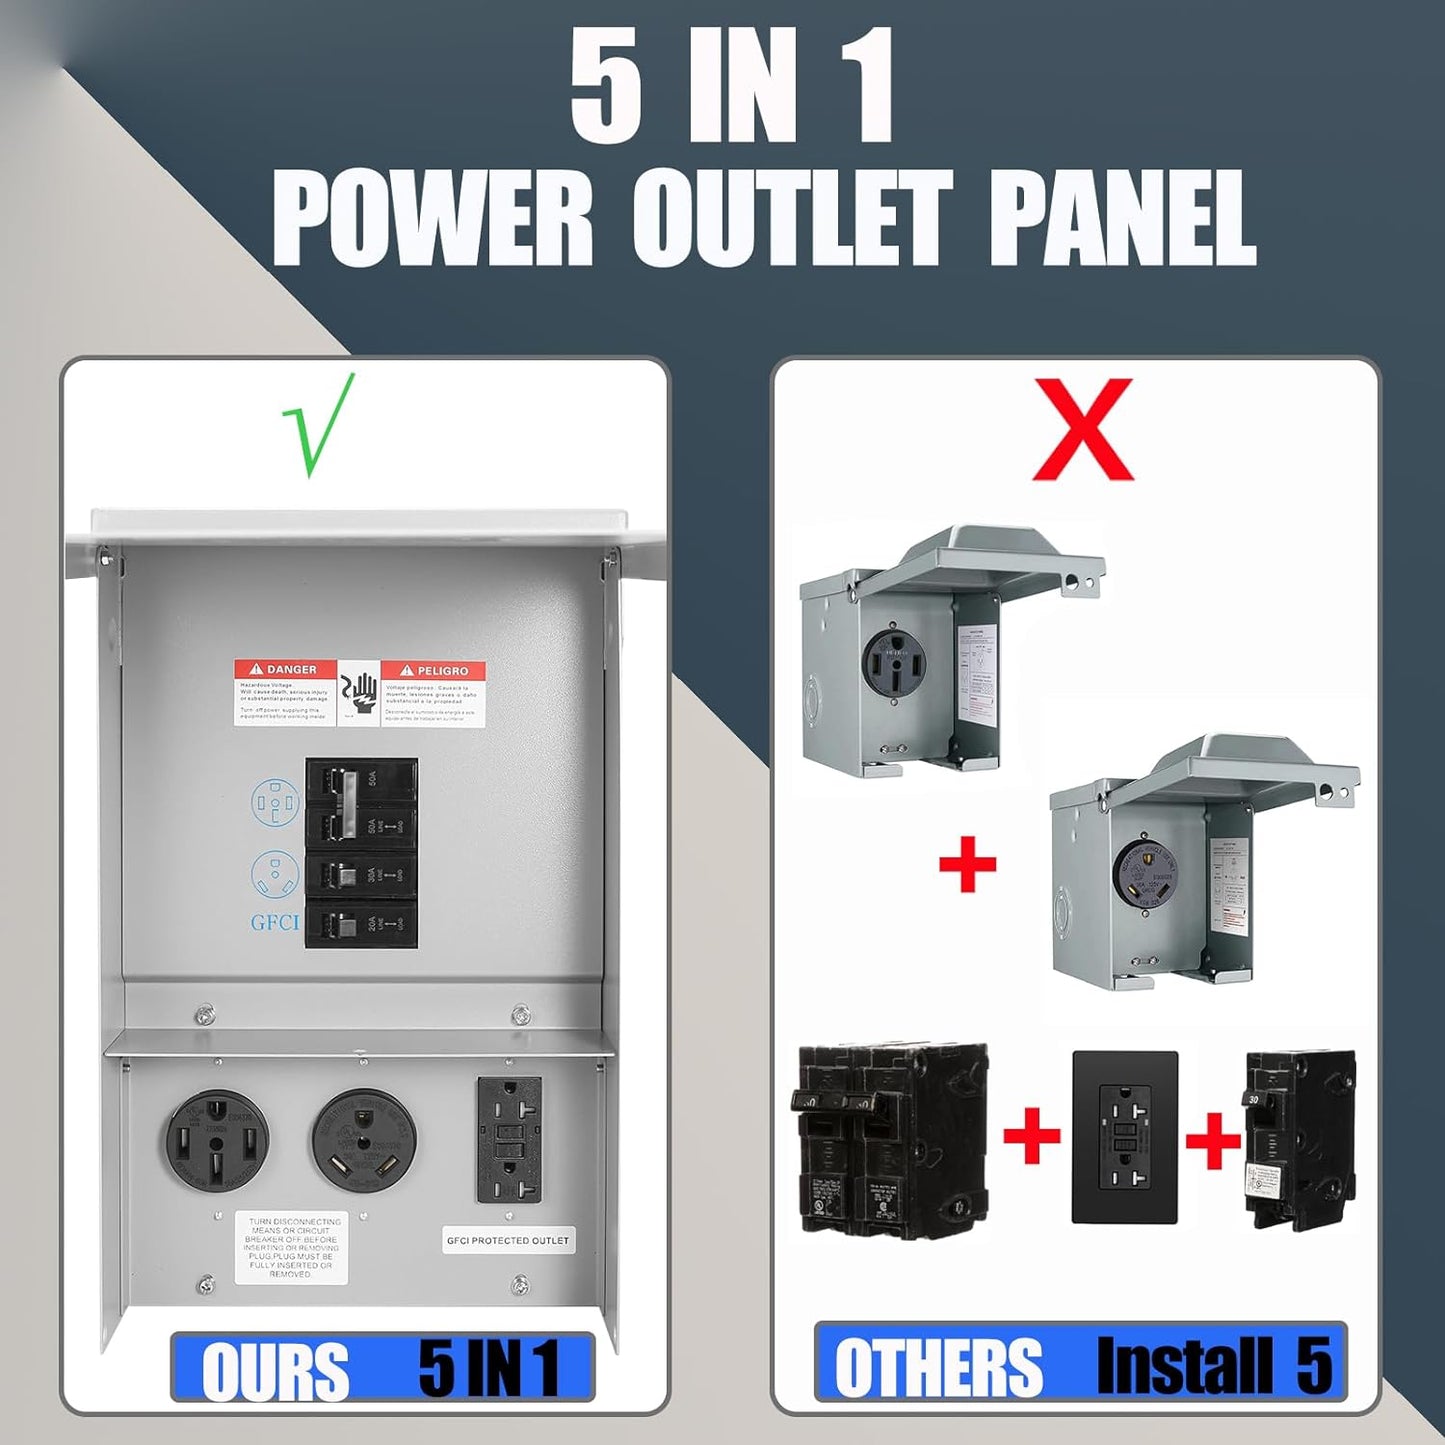 Temporary Electrical Power Outlet Panel Weatherproof RV Receptacle Box with 30 50 Amp Breaker 20 Amp GFCI Outlet Outdoor Panel for RV Camper Car Travel Generator Motorhome (50+30+20 Amp)